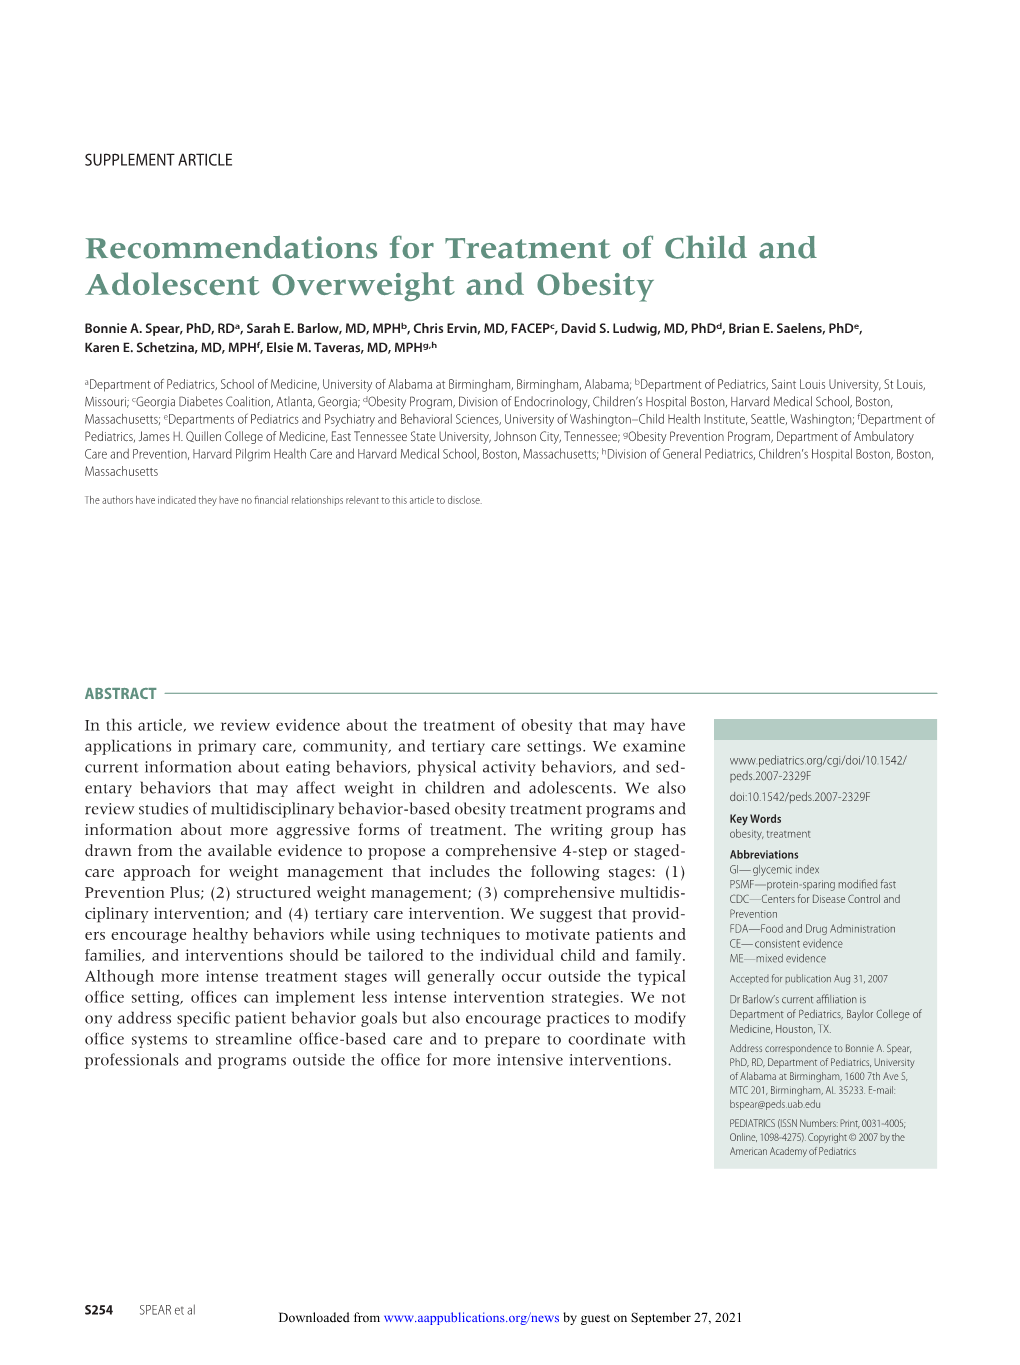 Recommendations for Treatment of Child and Adolescent Overweight and Obesity